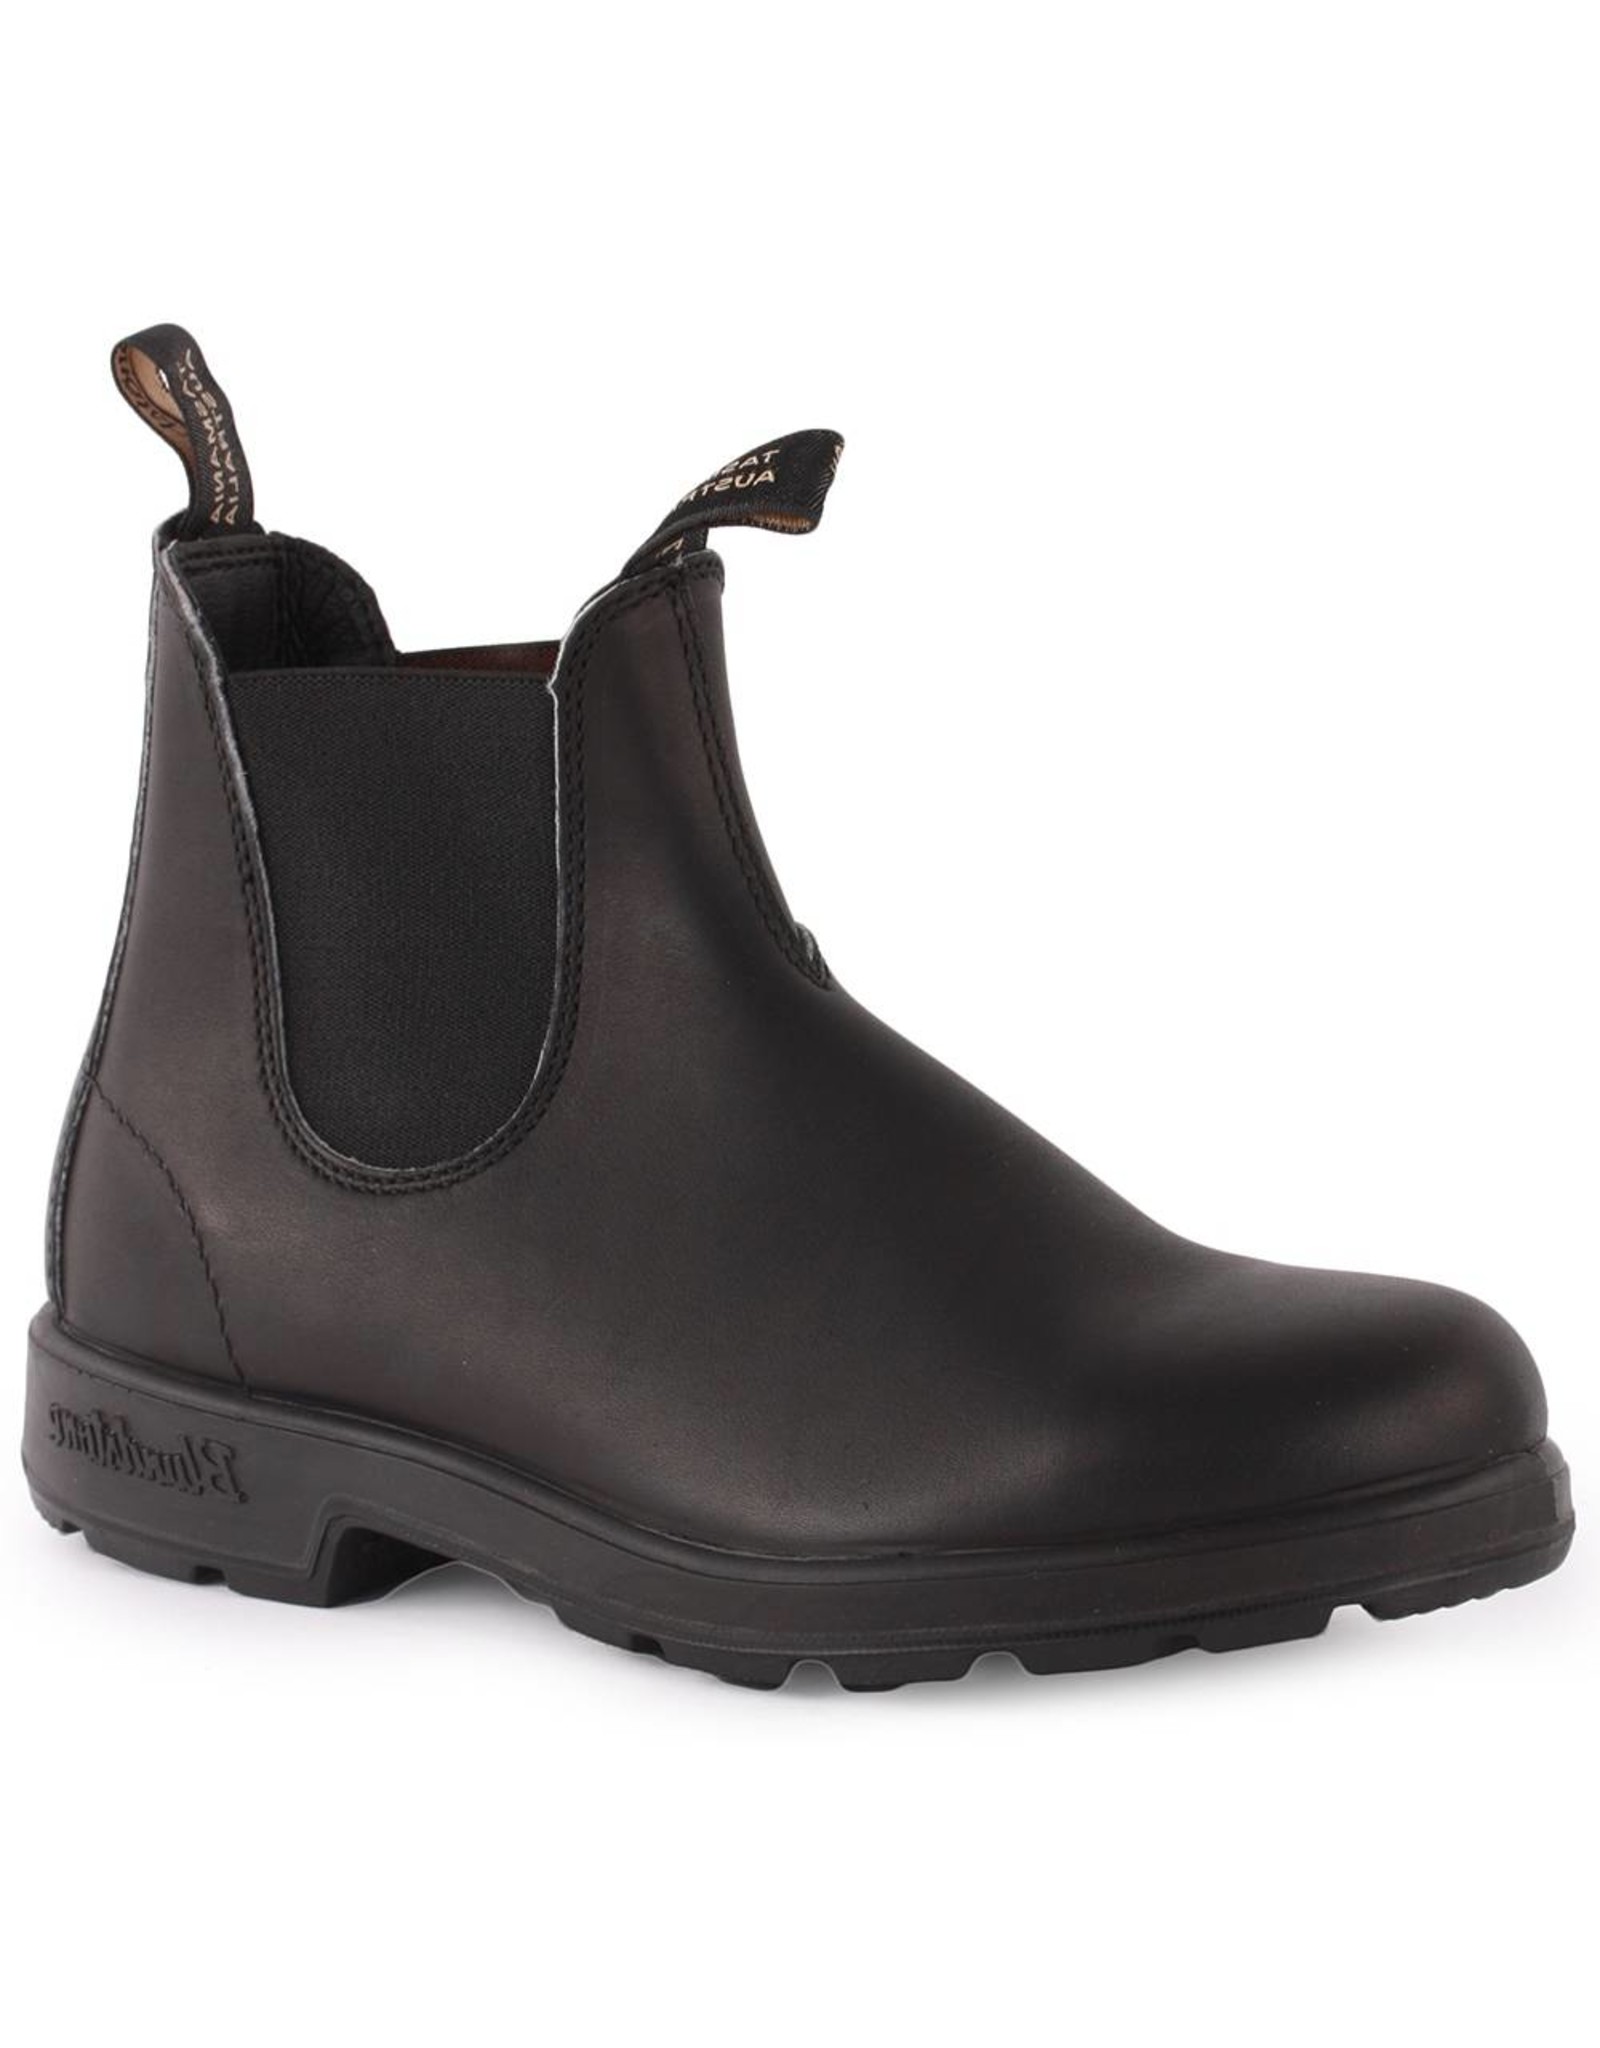 blundstone 510 boots